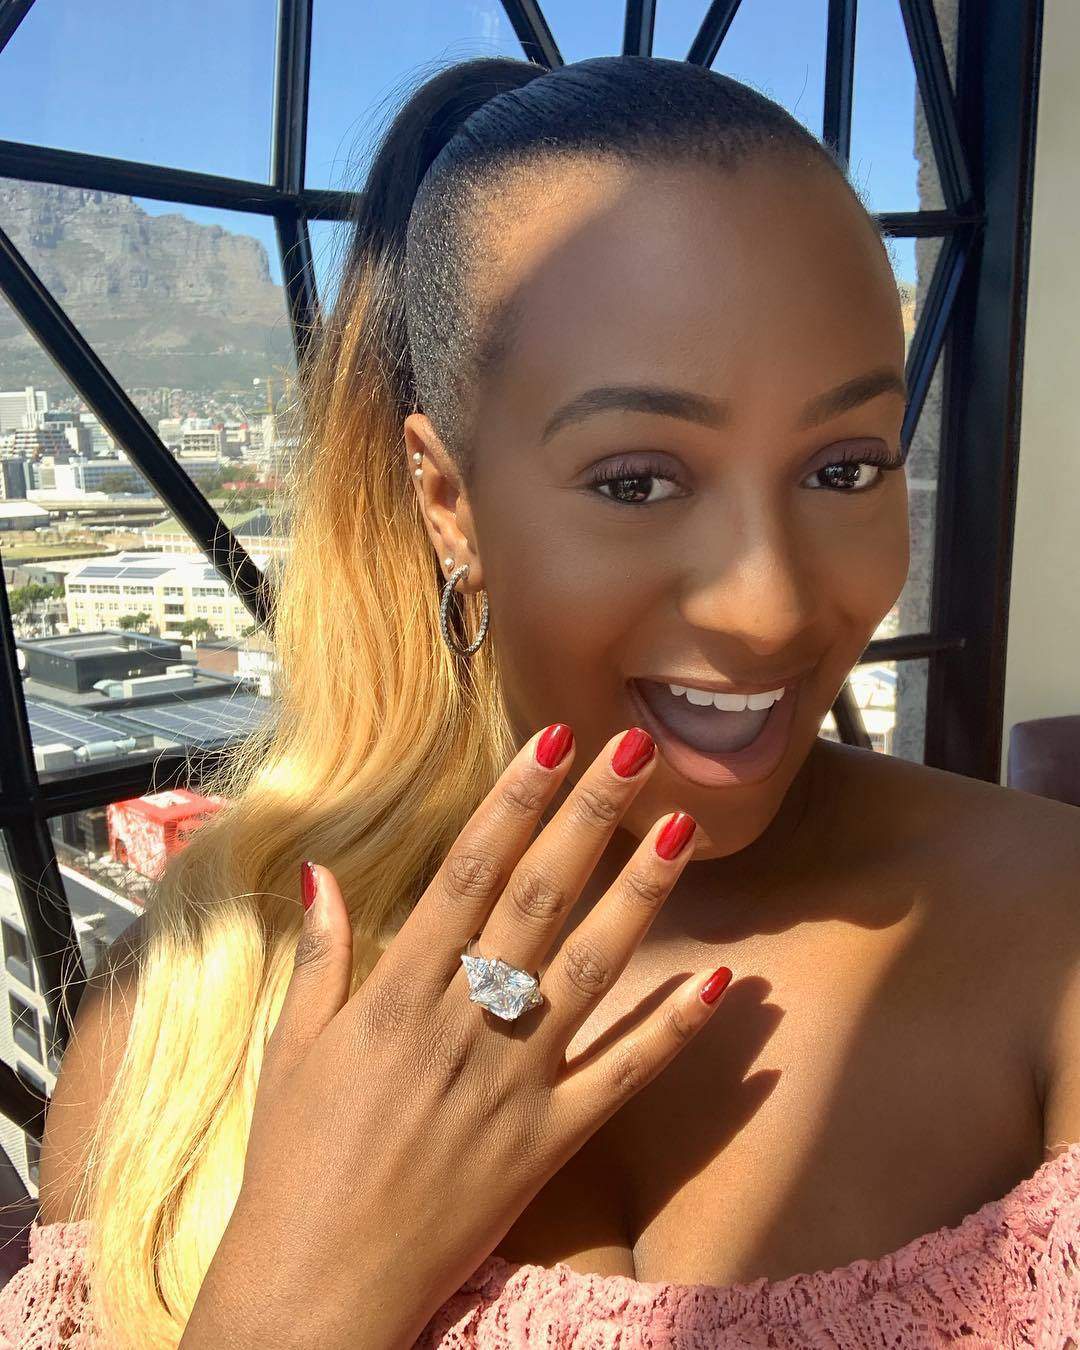 DJ Cuppy says she won't be deterred from achieving her purpose